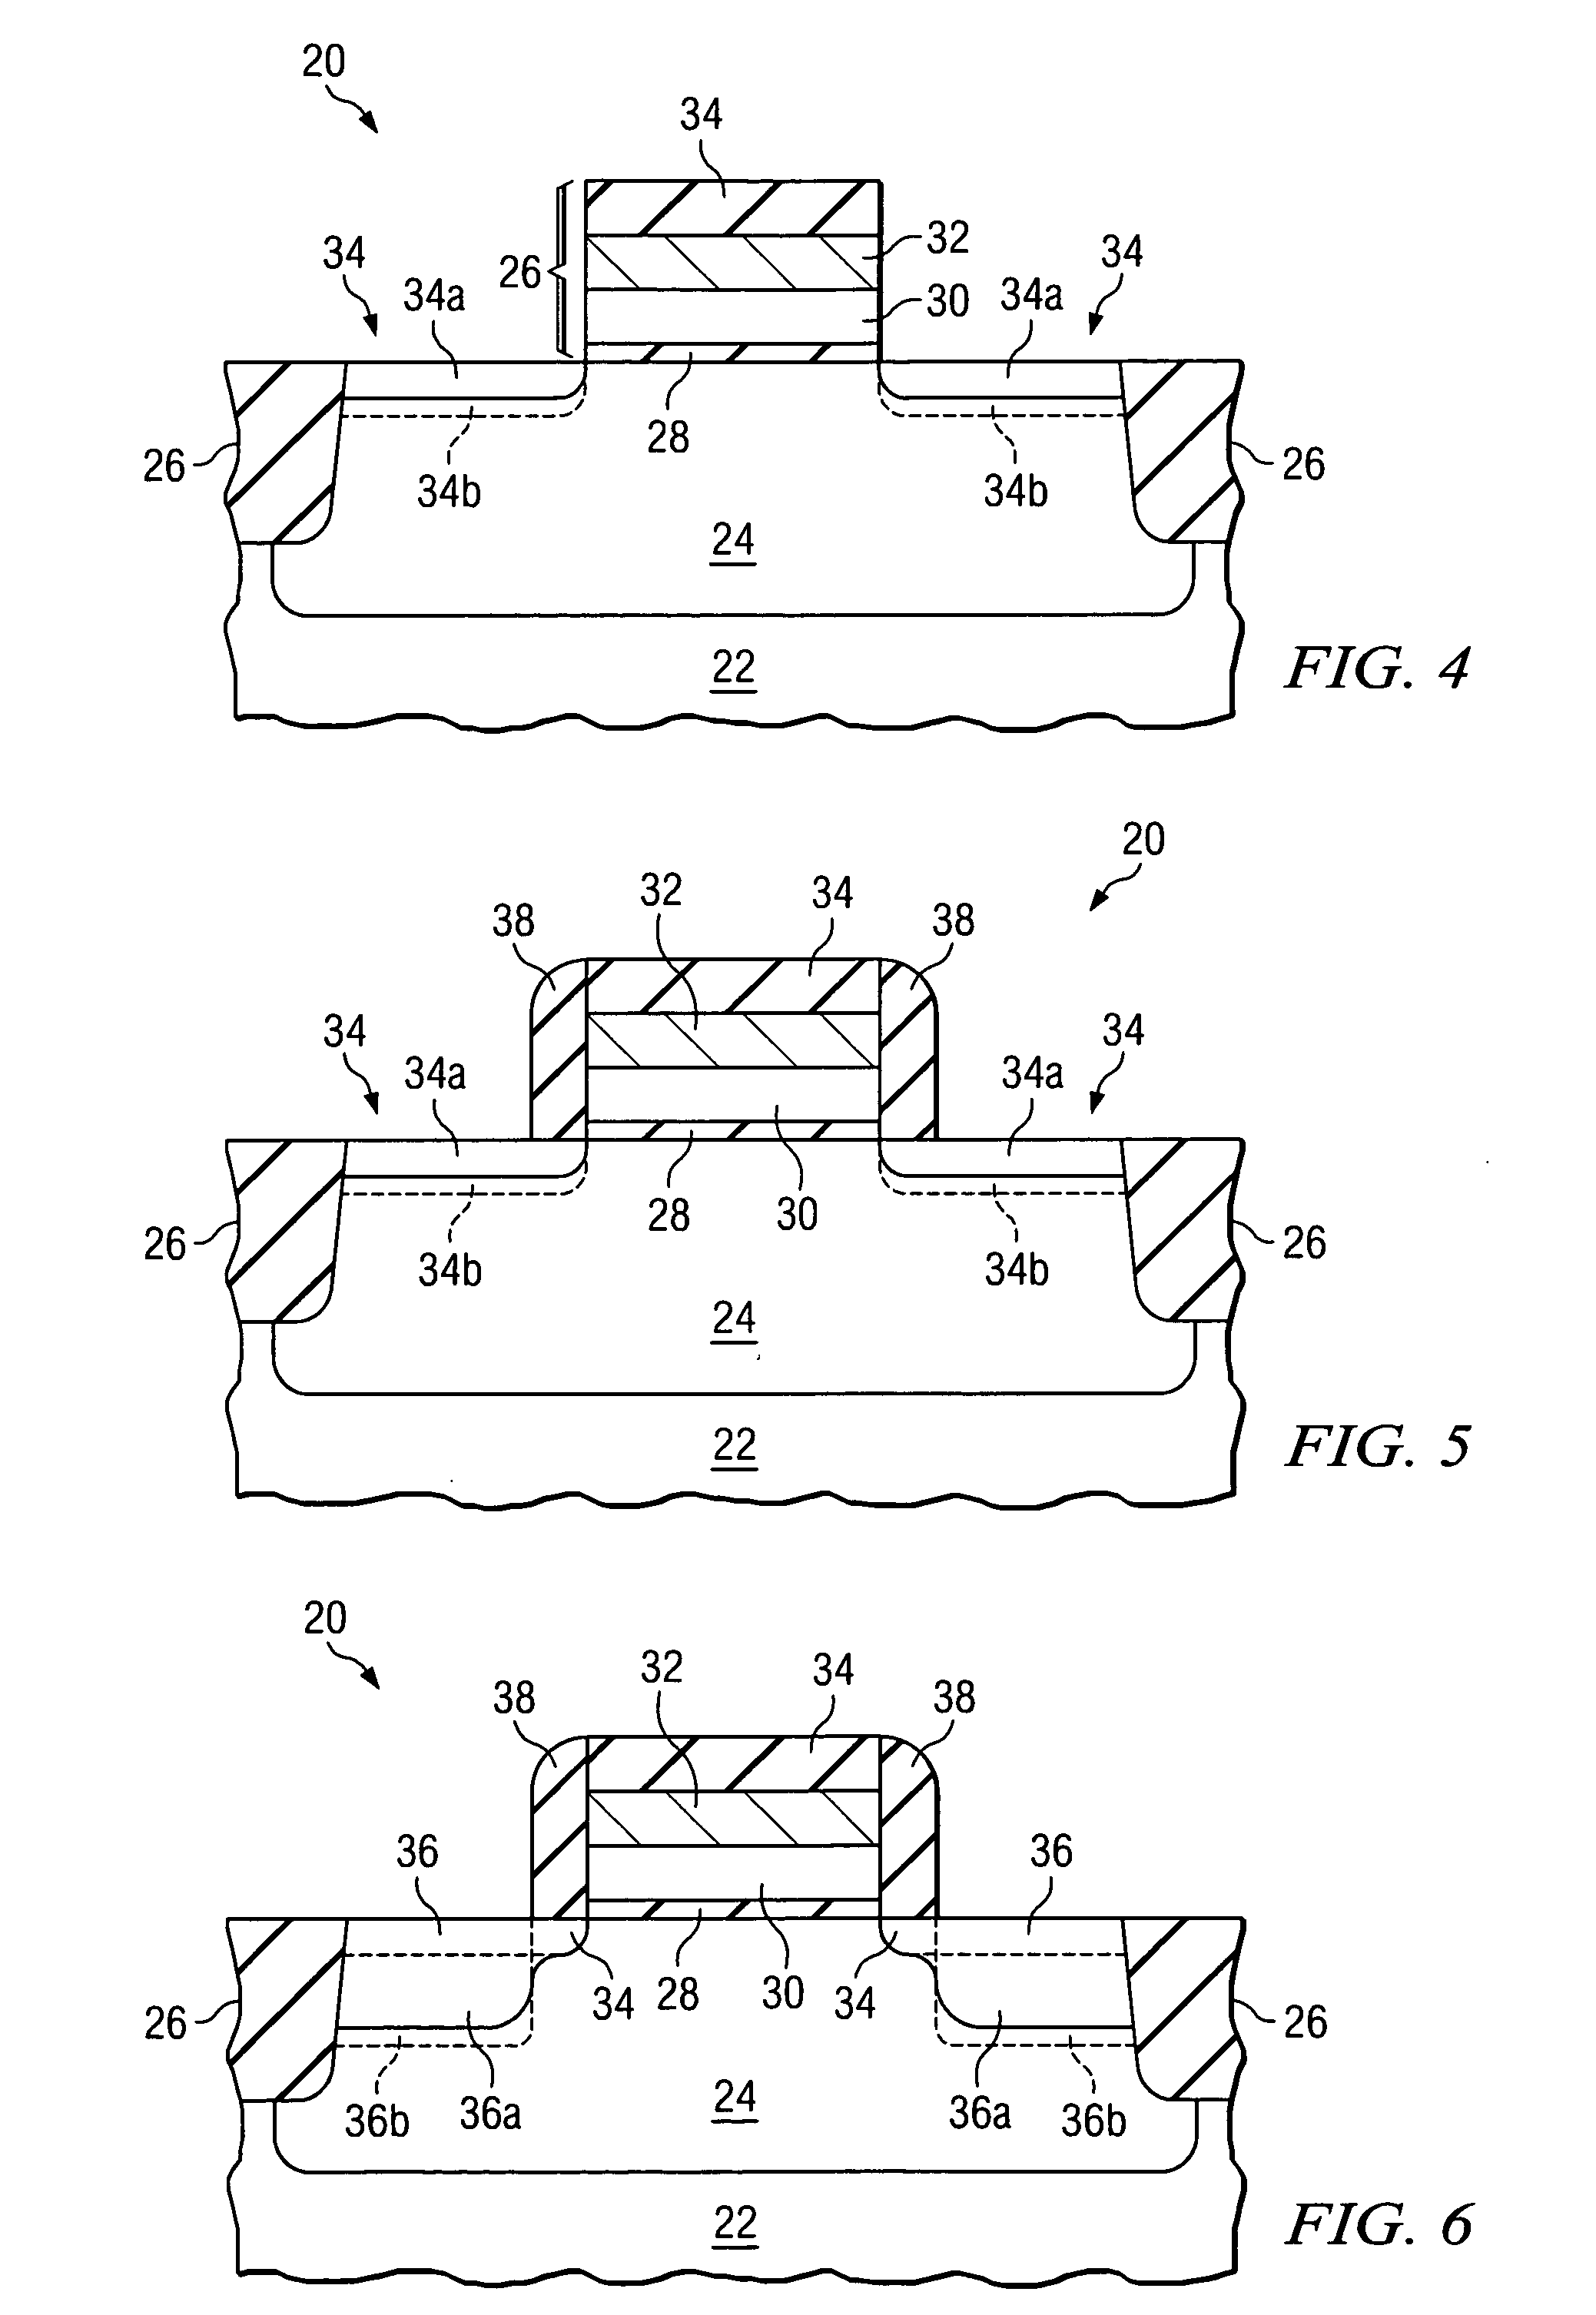 Implantation process in semiconductor fabrication